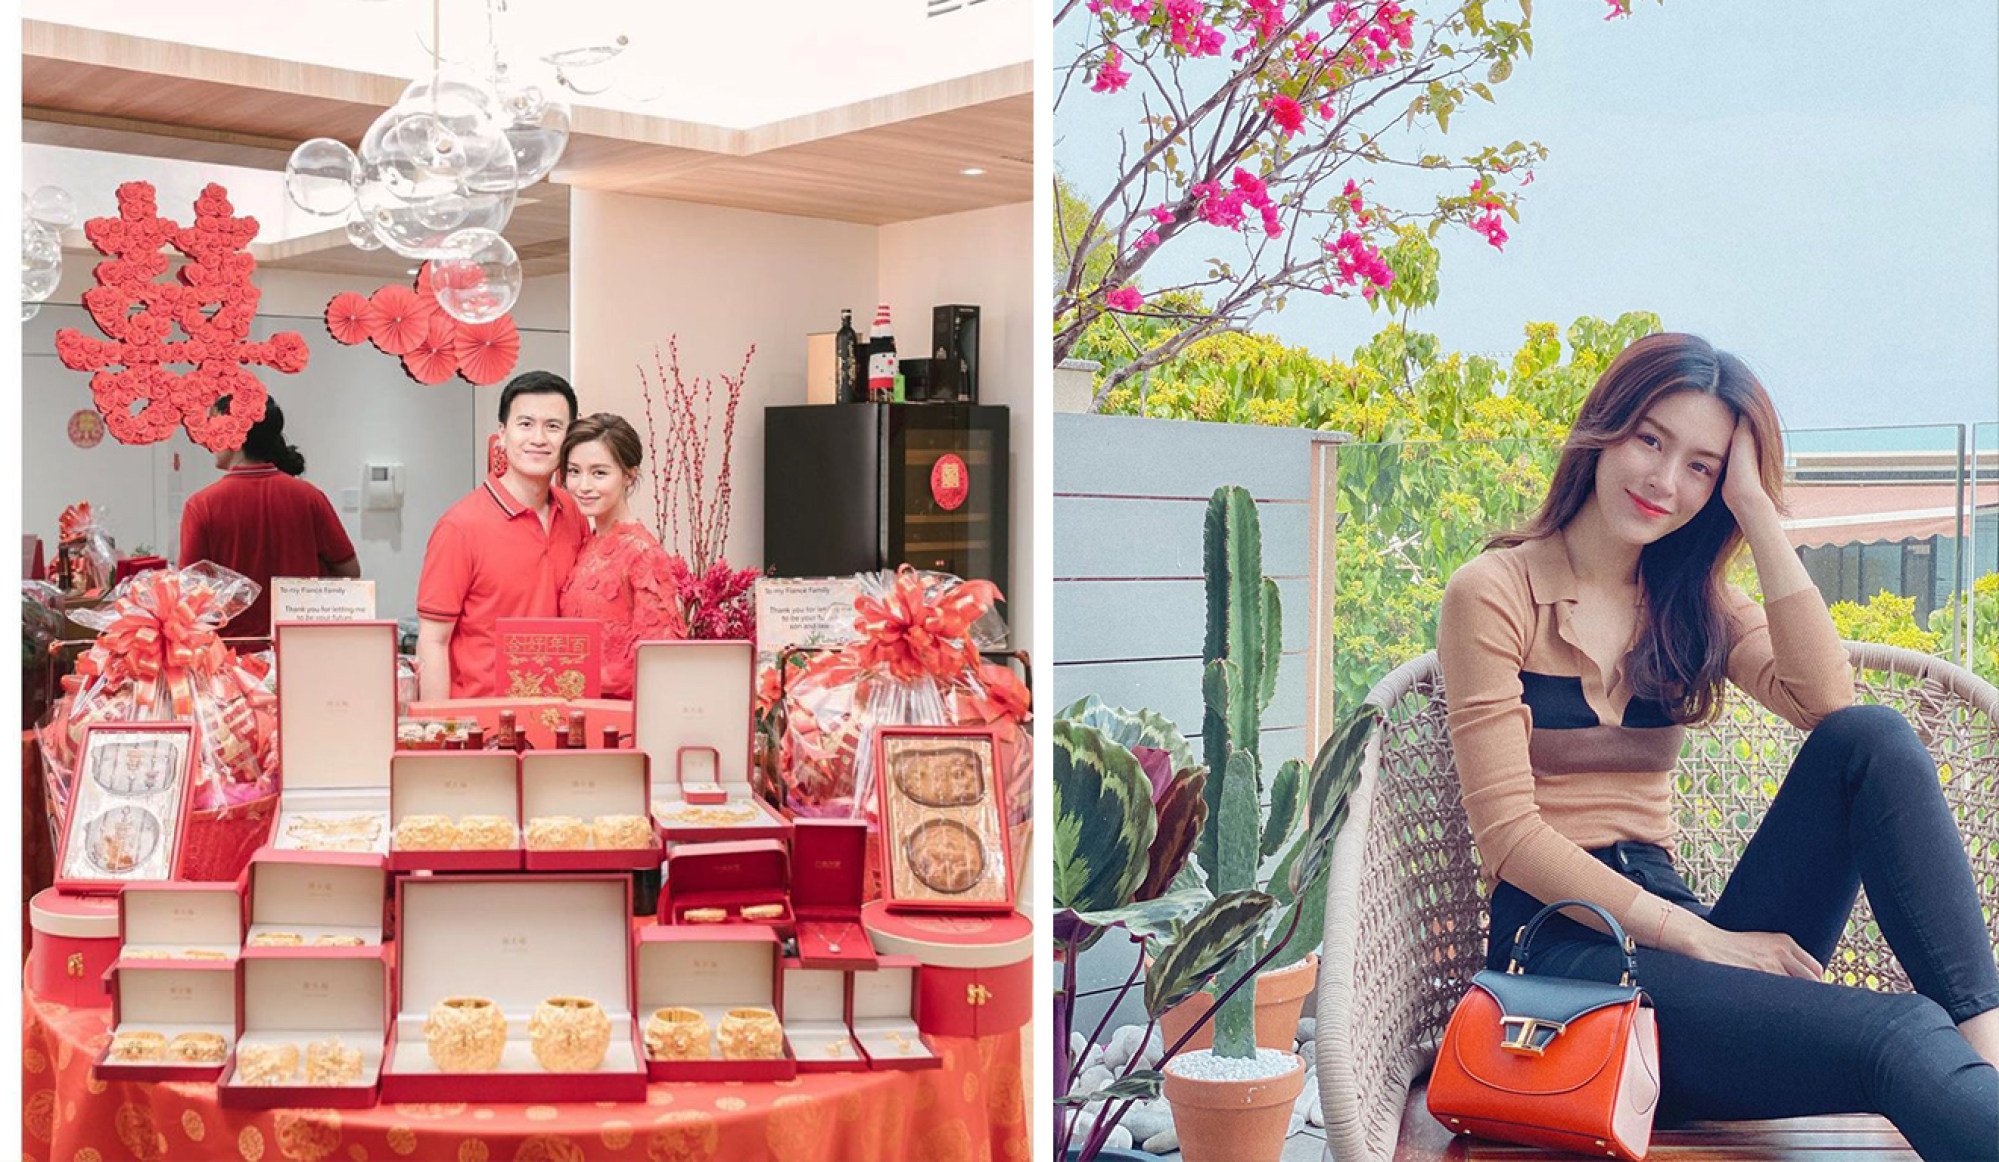 Hong Kong actress Cecilia Choi's exquisite luxury bag collection: from Louis  Vuitton's classic Twist MM and Gucci's iconic Bamboo 1947, to Prada's  Galleria, a Dior Travel Nomad and a Fendi Peekaboo